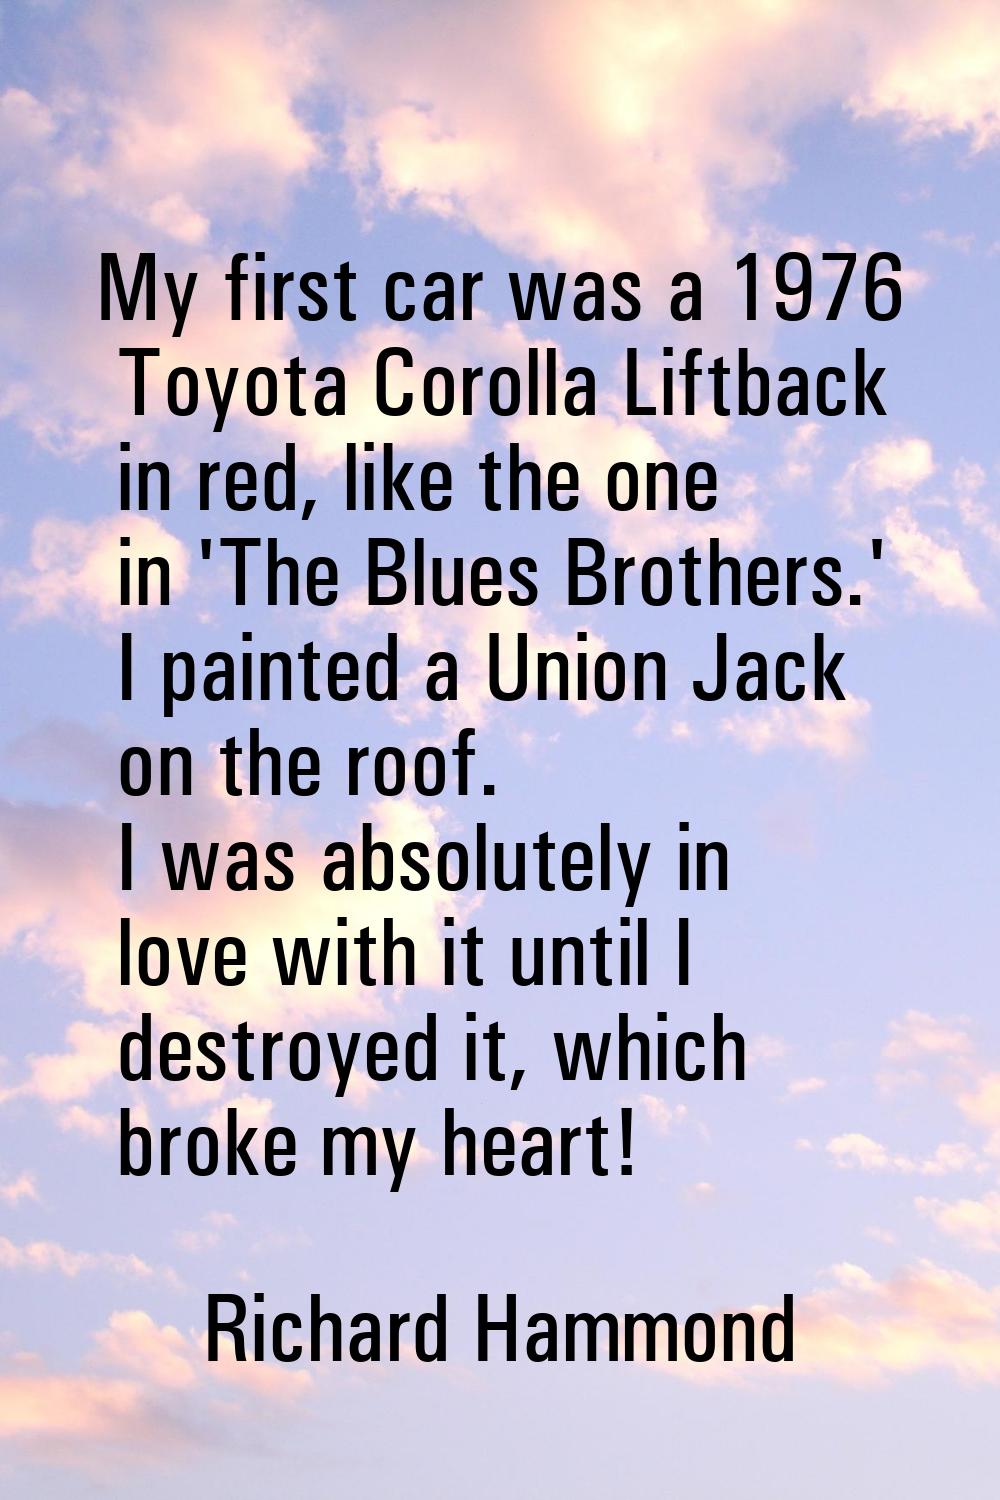 My first car was a 1976 Toyota Corolla Liftback in red, like the one in 'The Blues Brothers.' I pai